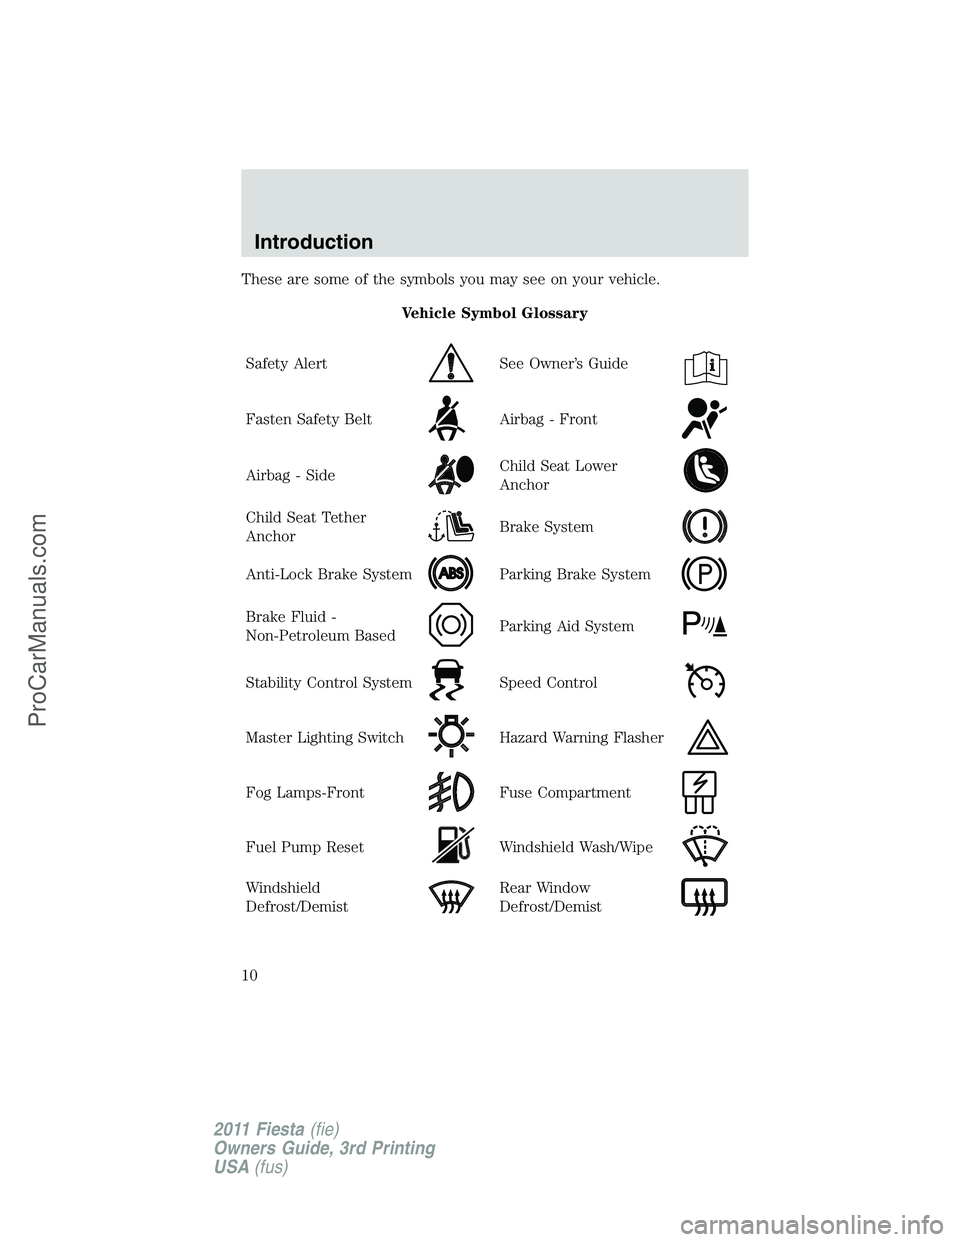 FORD FIESTA 2011  Owners Manual These are some of the symbols you may see on your vehicle.
Vehicle Symbol Glossary
Safety Alert
See Owner’s Guide
Fasten Safety BeltAirbag - Front
Airbag - SideChild Seat Lower
Anchor
Child Seat Tet